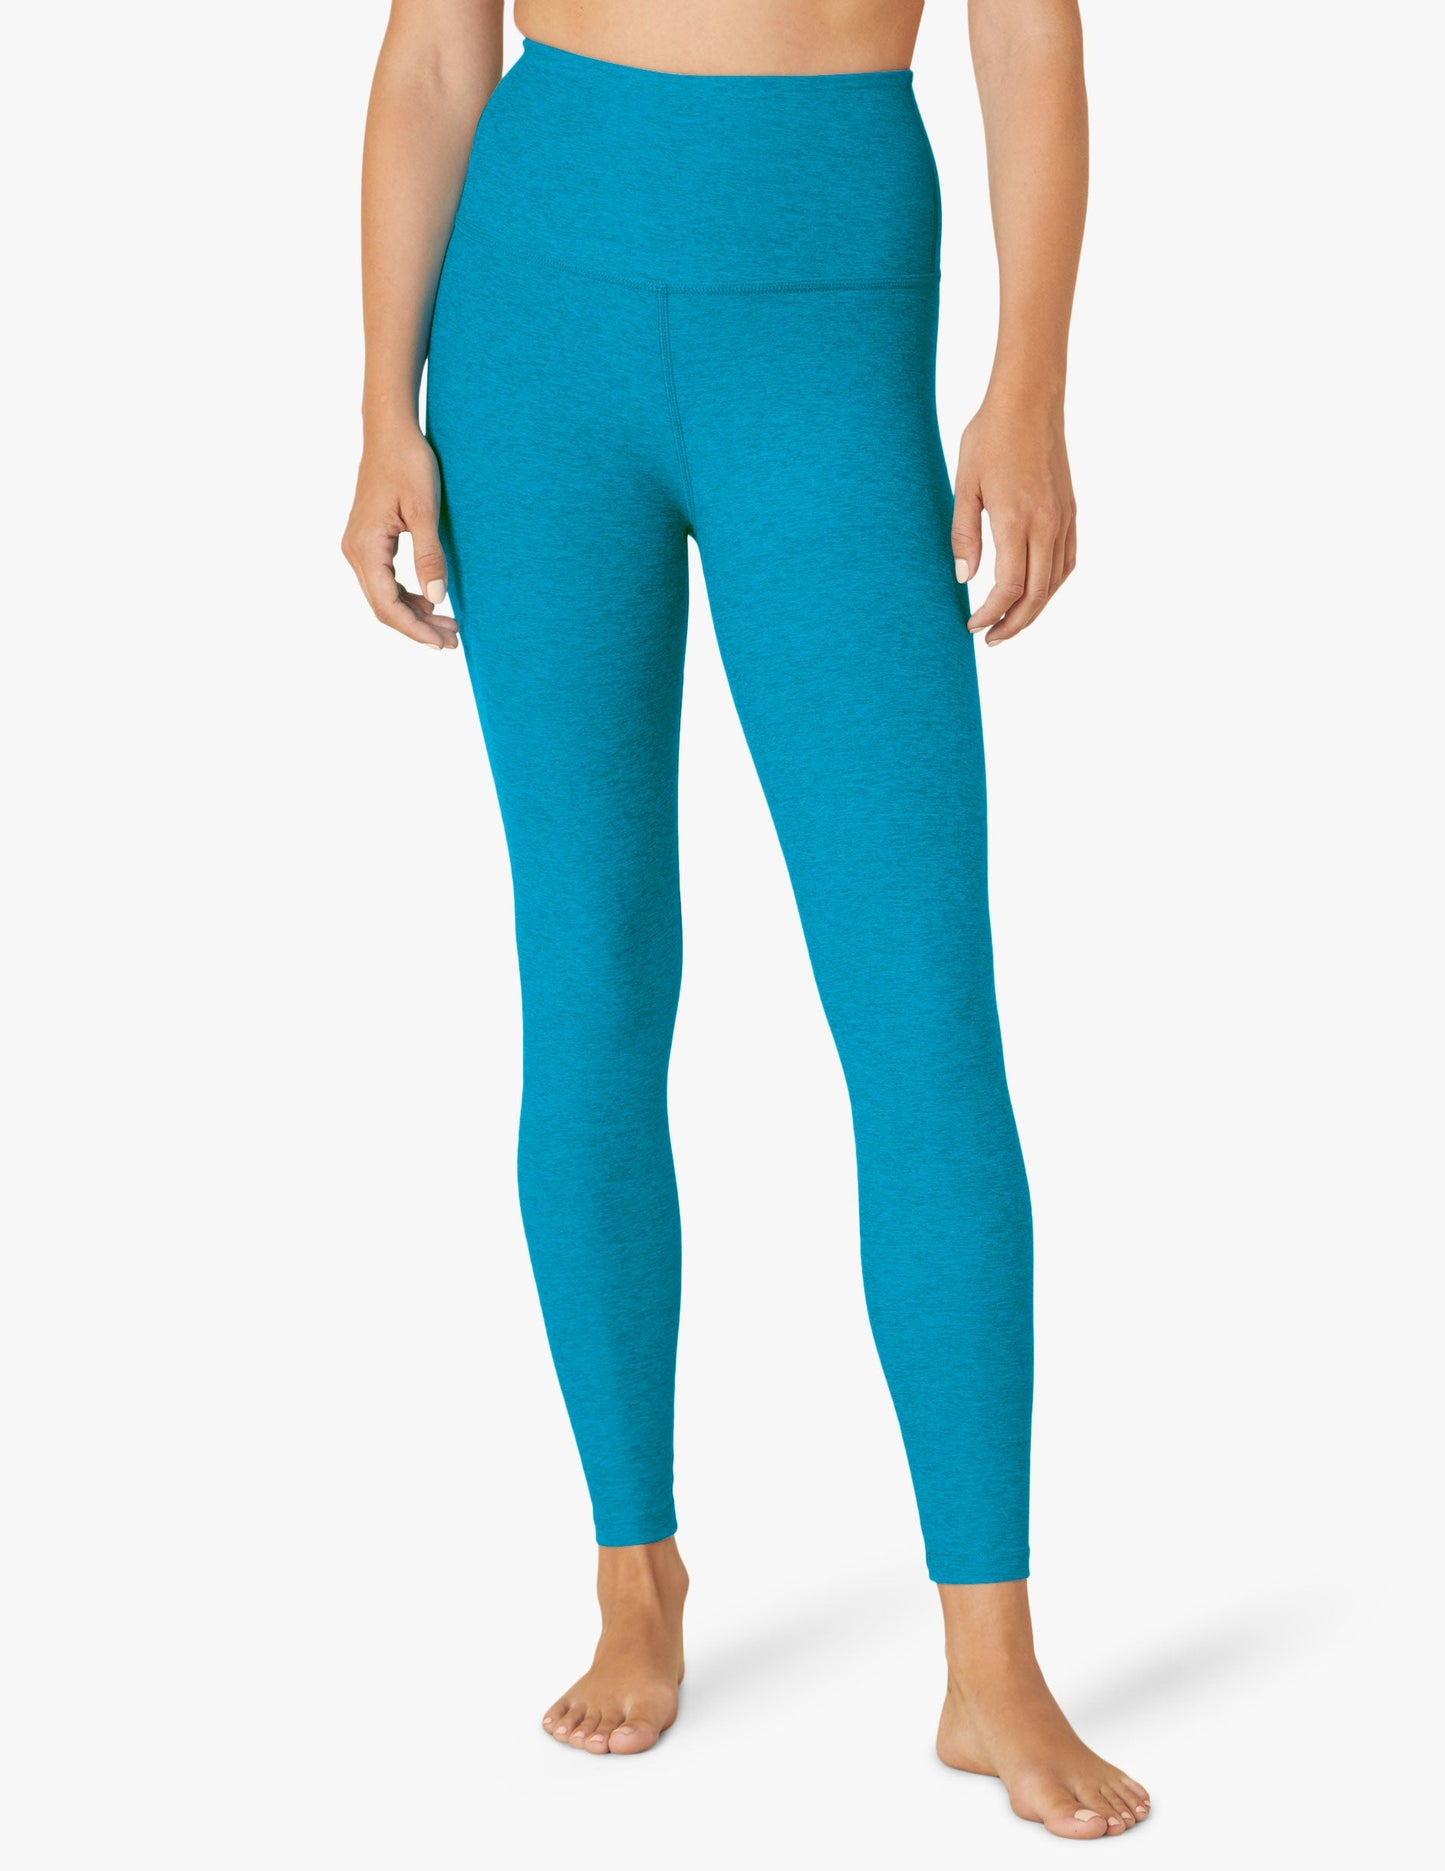 BEYOND YOGA CAUGHT IN THE MIDI HIGH WAISTED LEGGING BLUE GLOW HEATHER